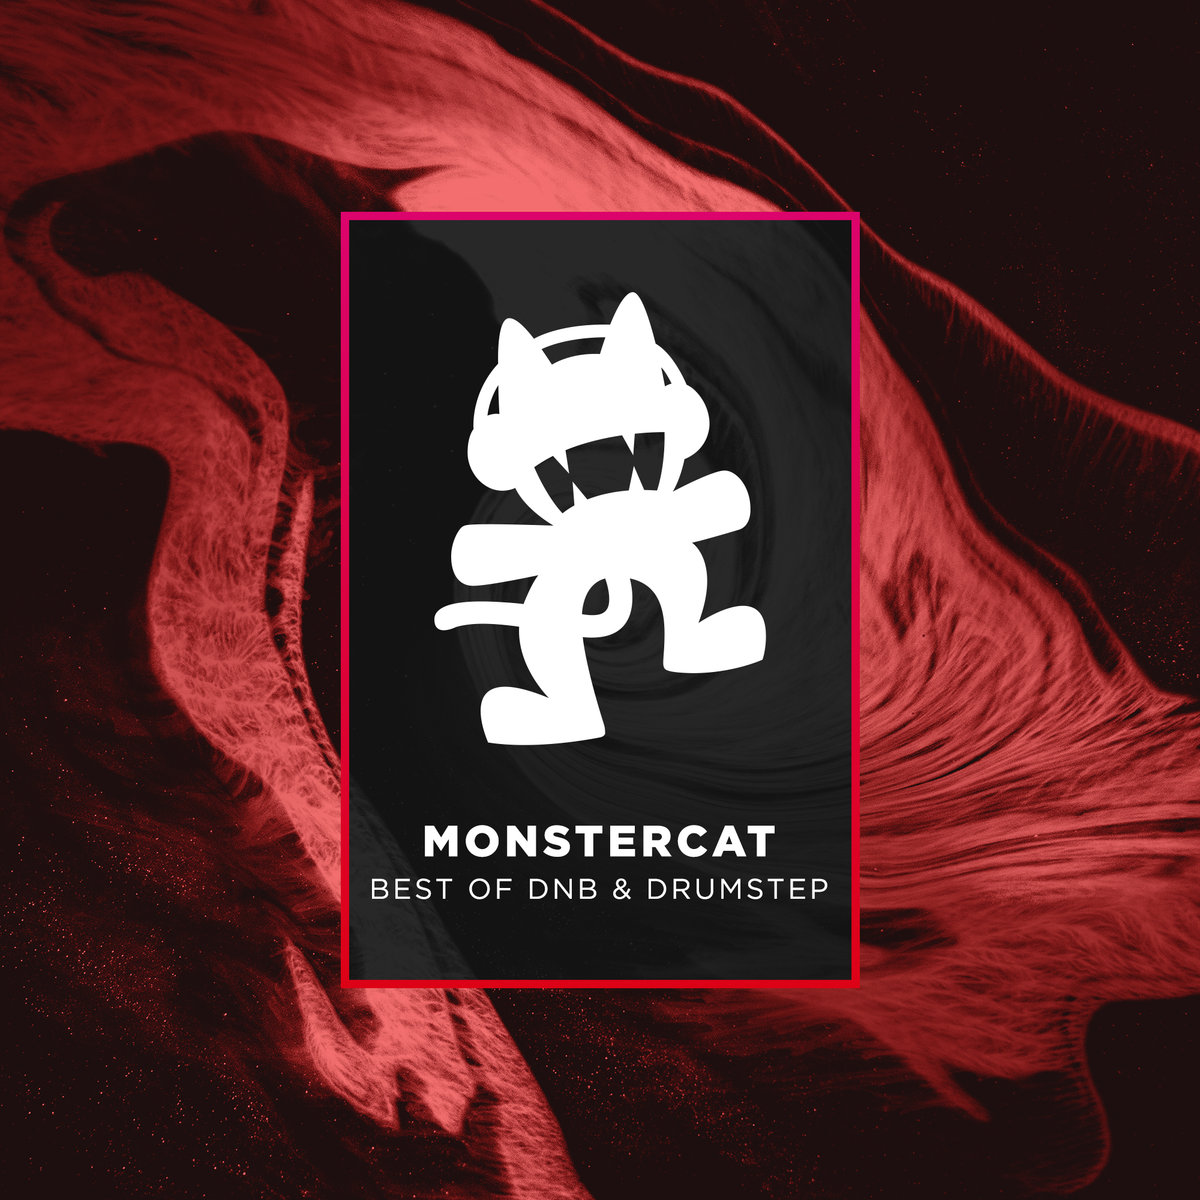 osu! on X: welcome aboard our latest Featured Artist, @KOVENuk courtesy of  @Monstercat and @Liquicity! 5 classic drum & bass hits are now  available from this iconic duo including hits like Love